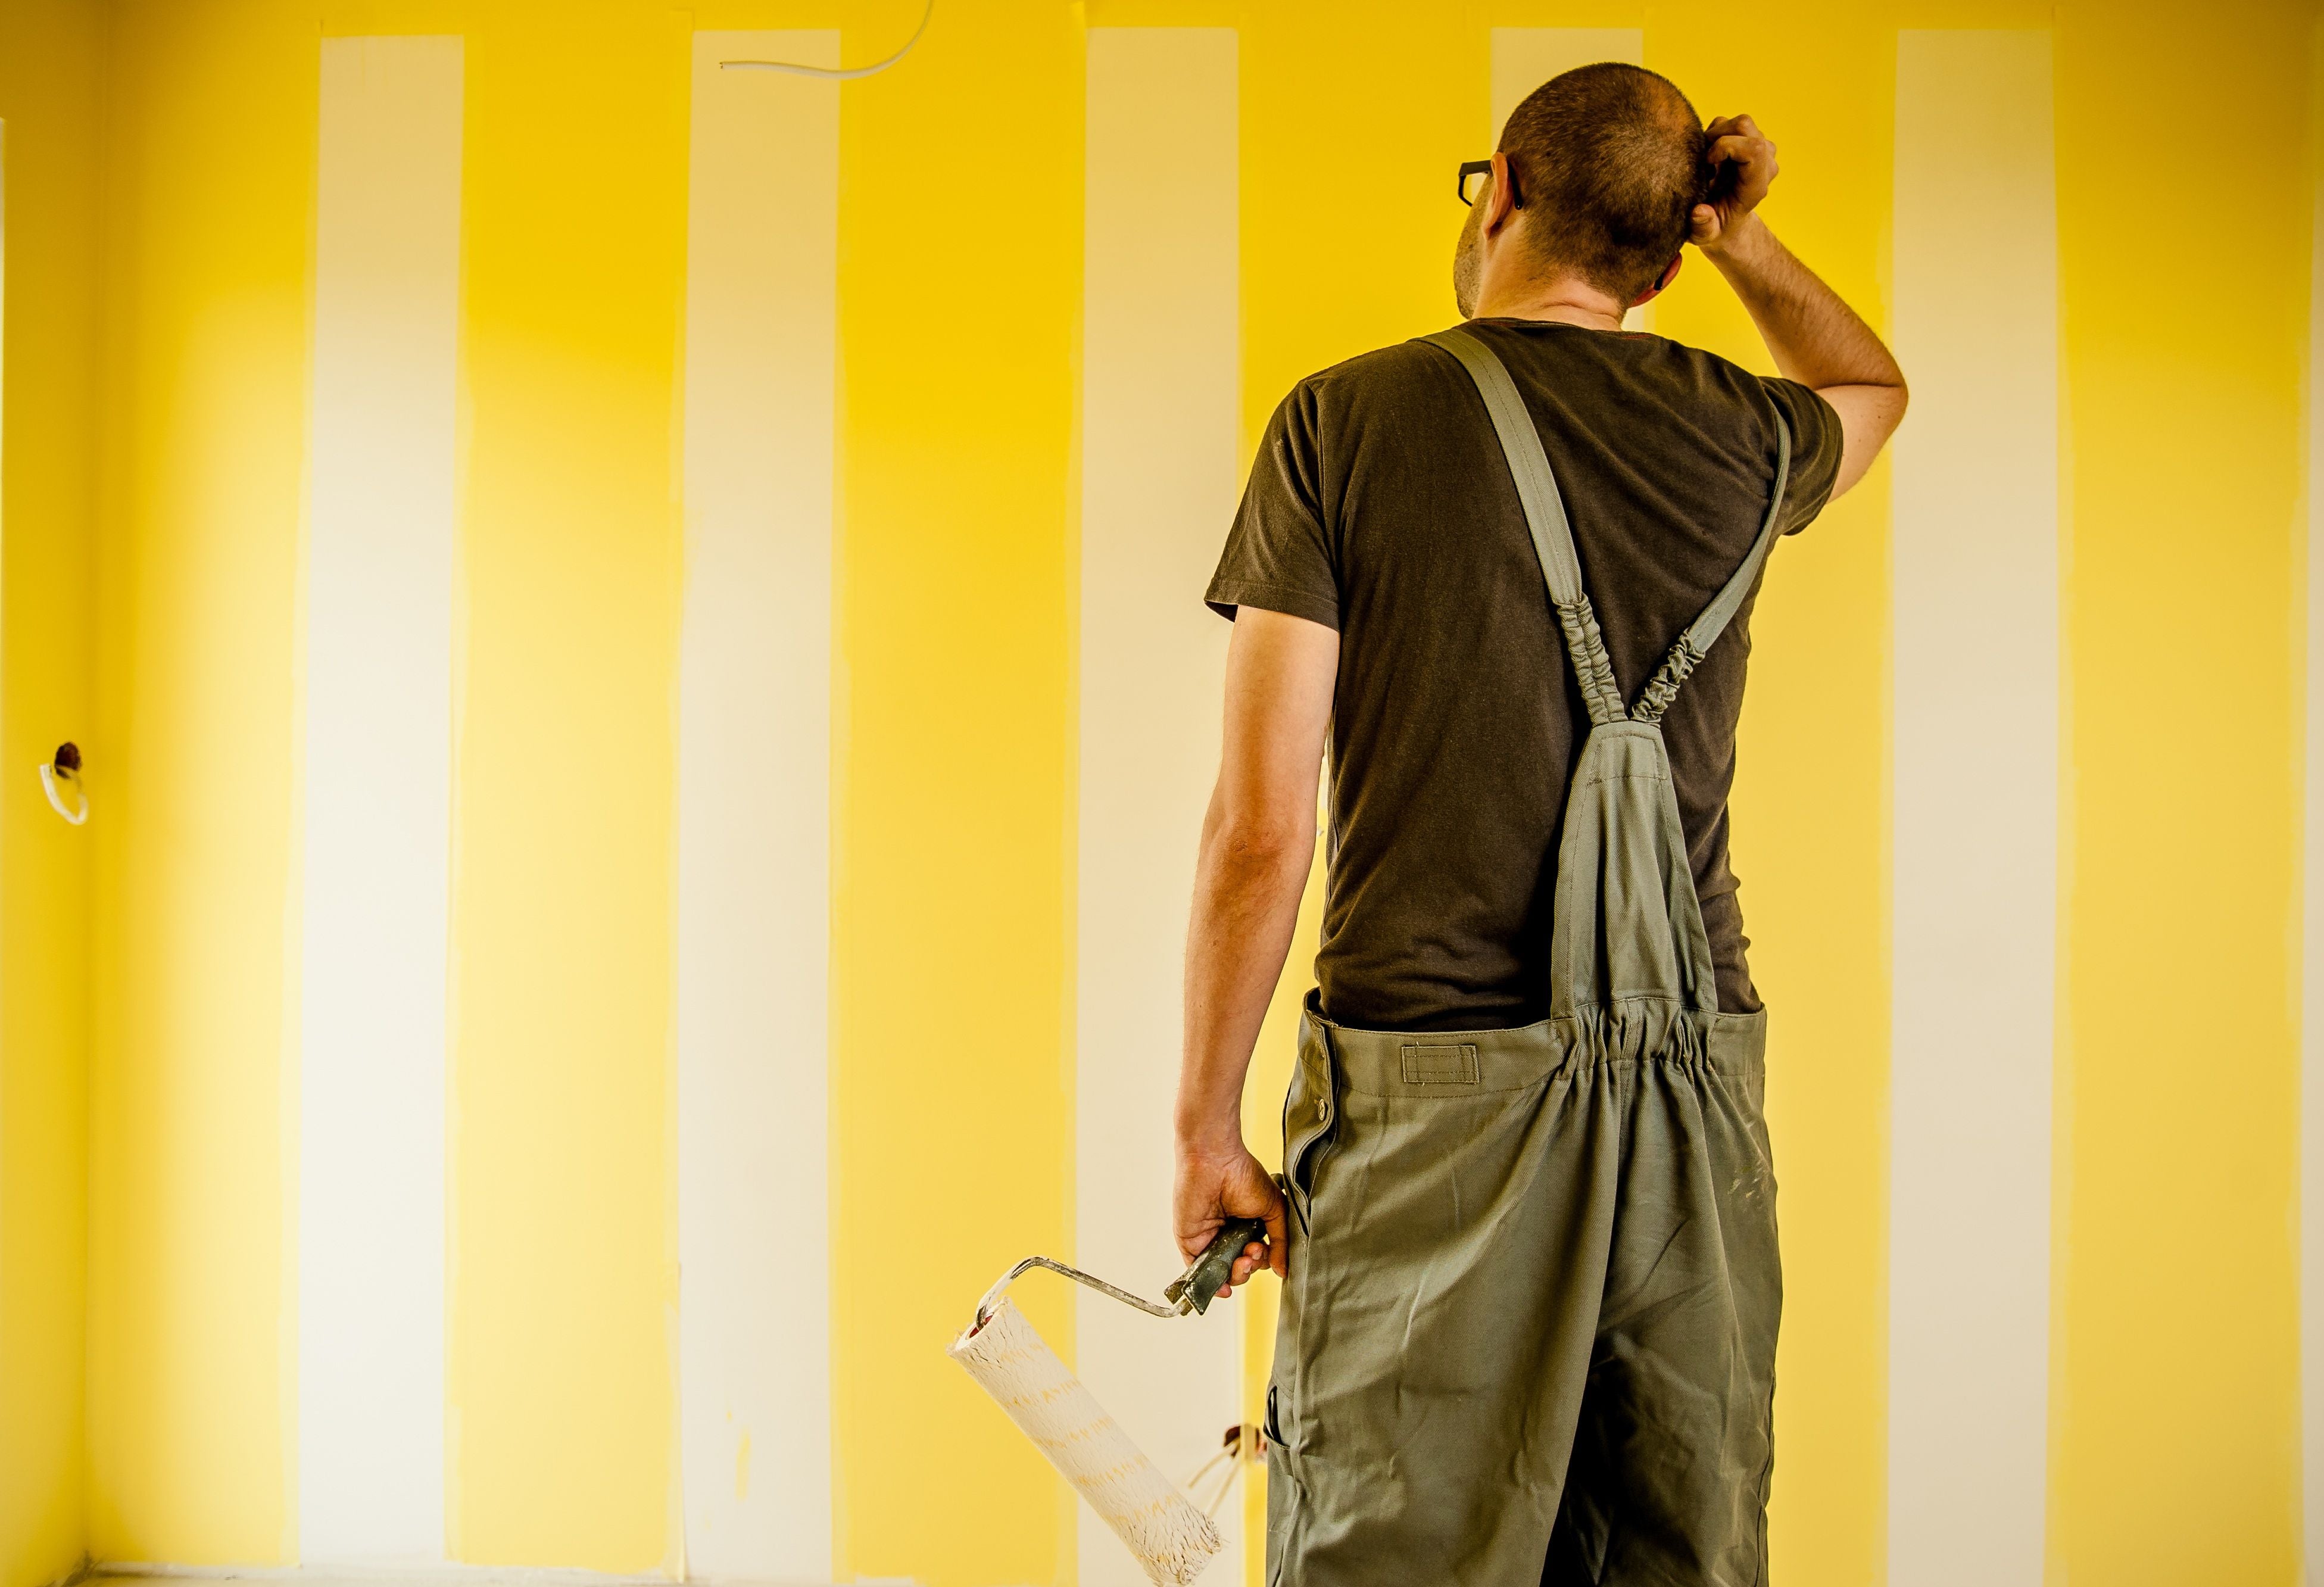 Man stares at the yellow wall where paint is in progress determing to paint baseboards or wall first. Bend Tool Co.